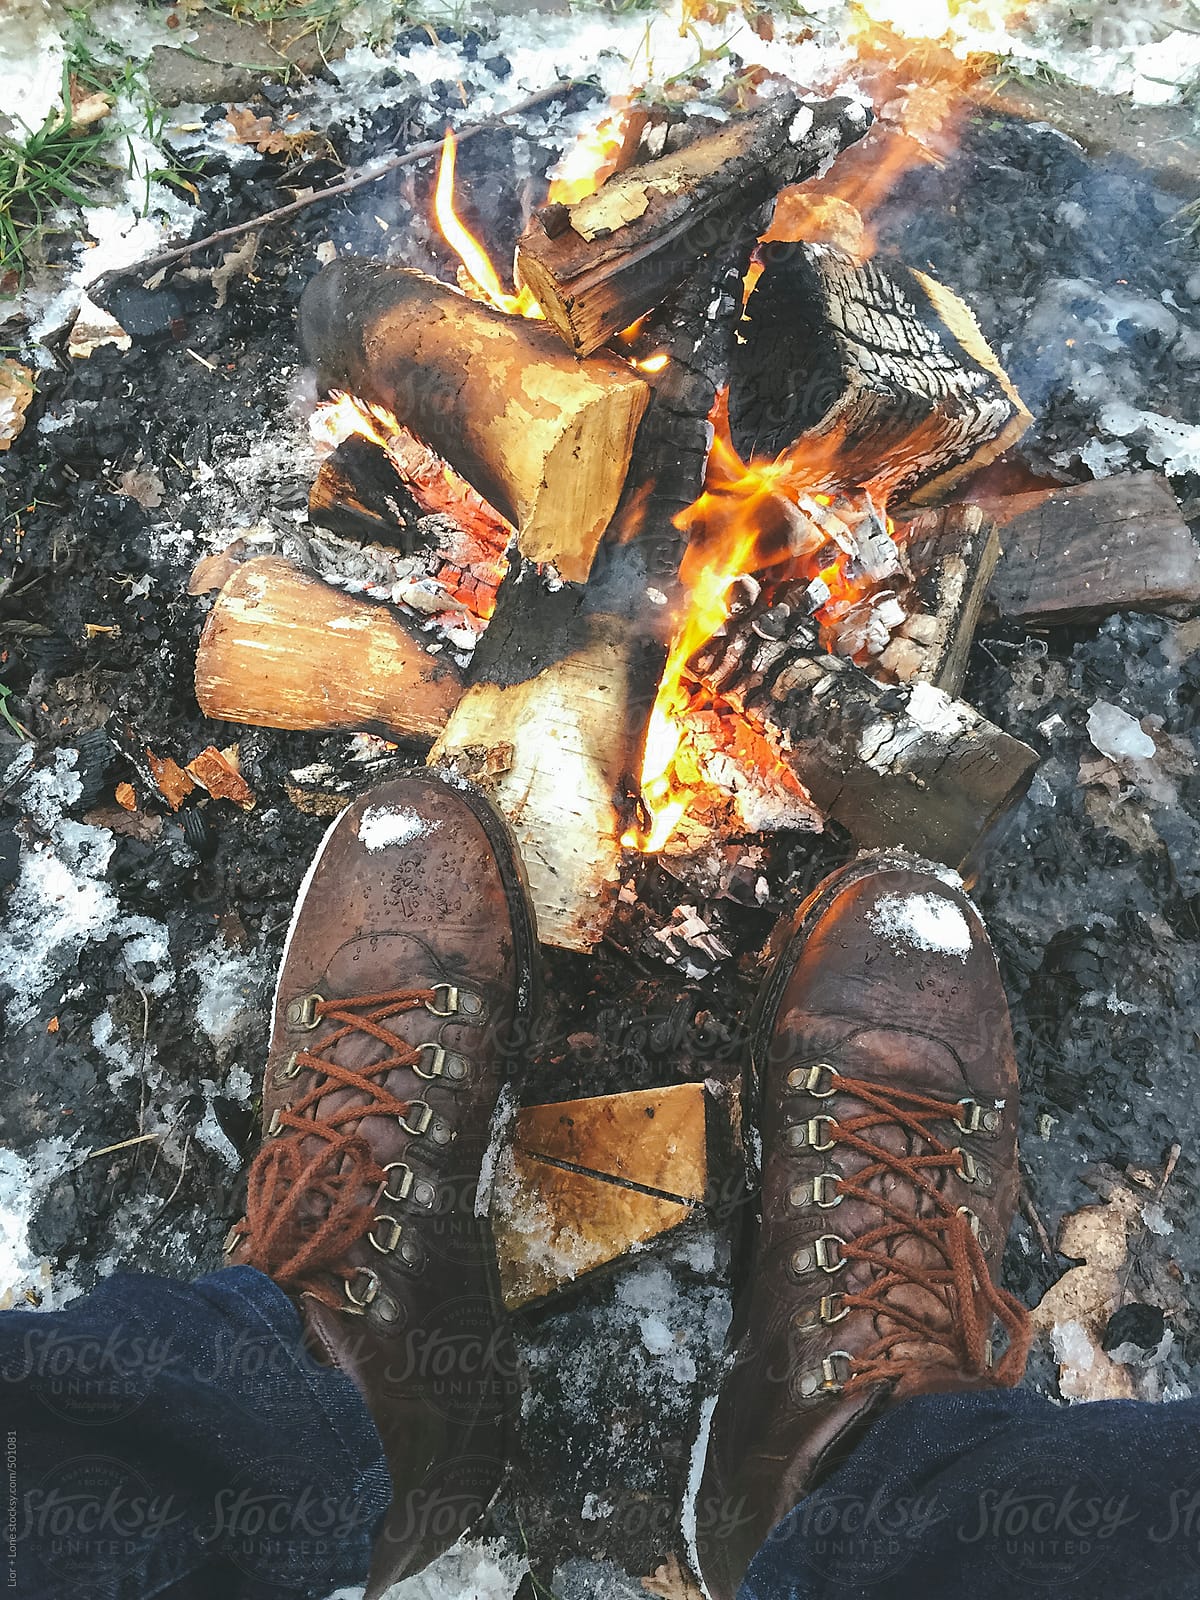 Man’s legs in boots next to fire in the snow